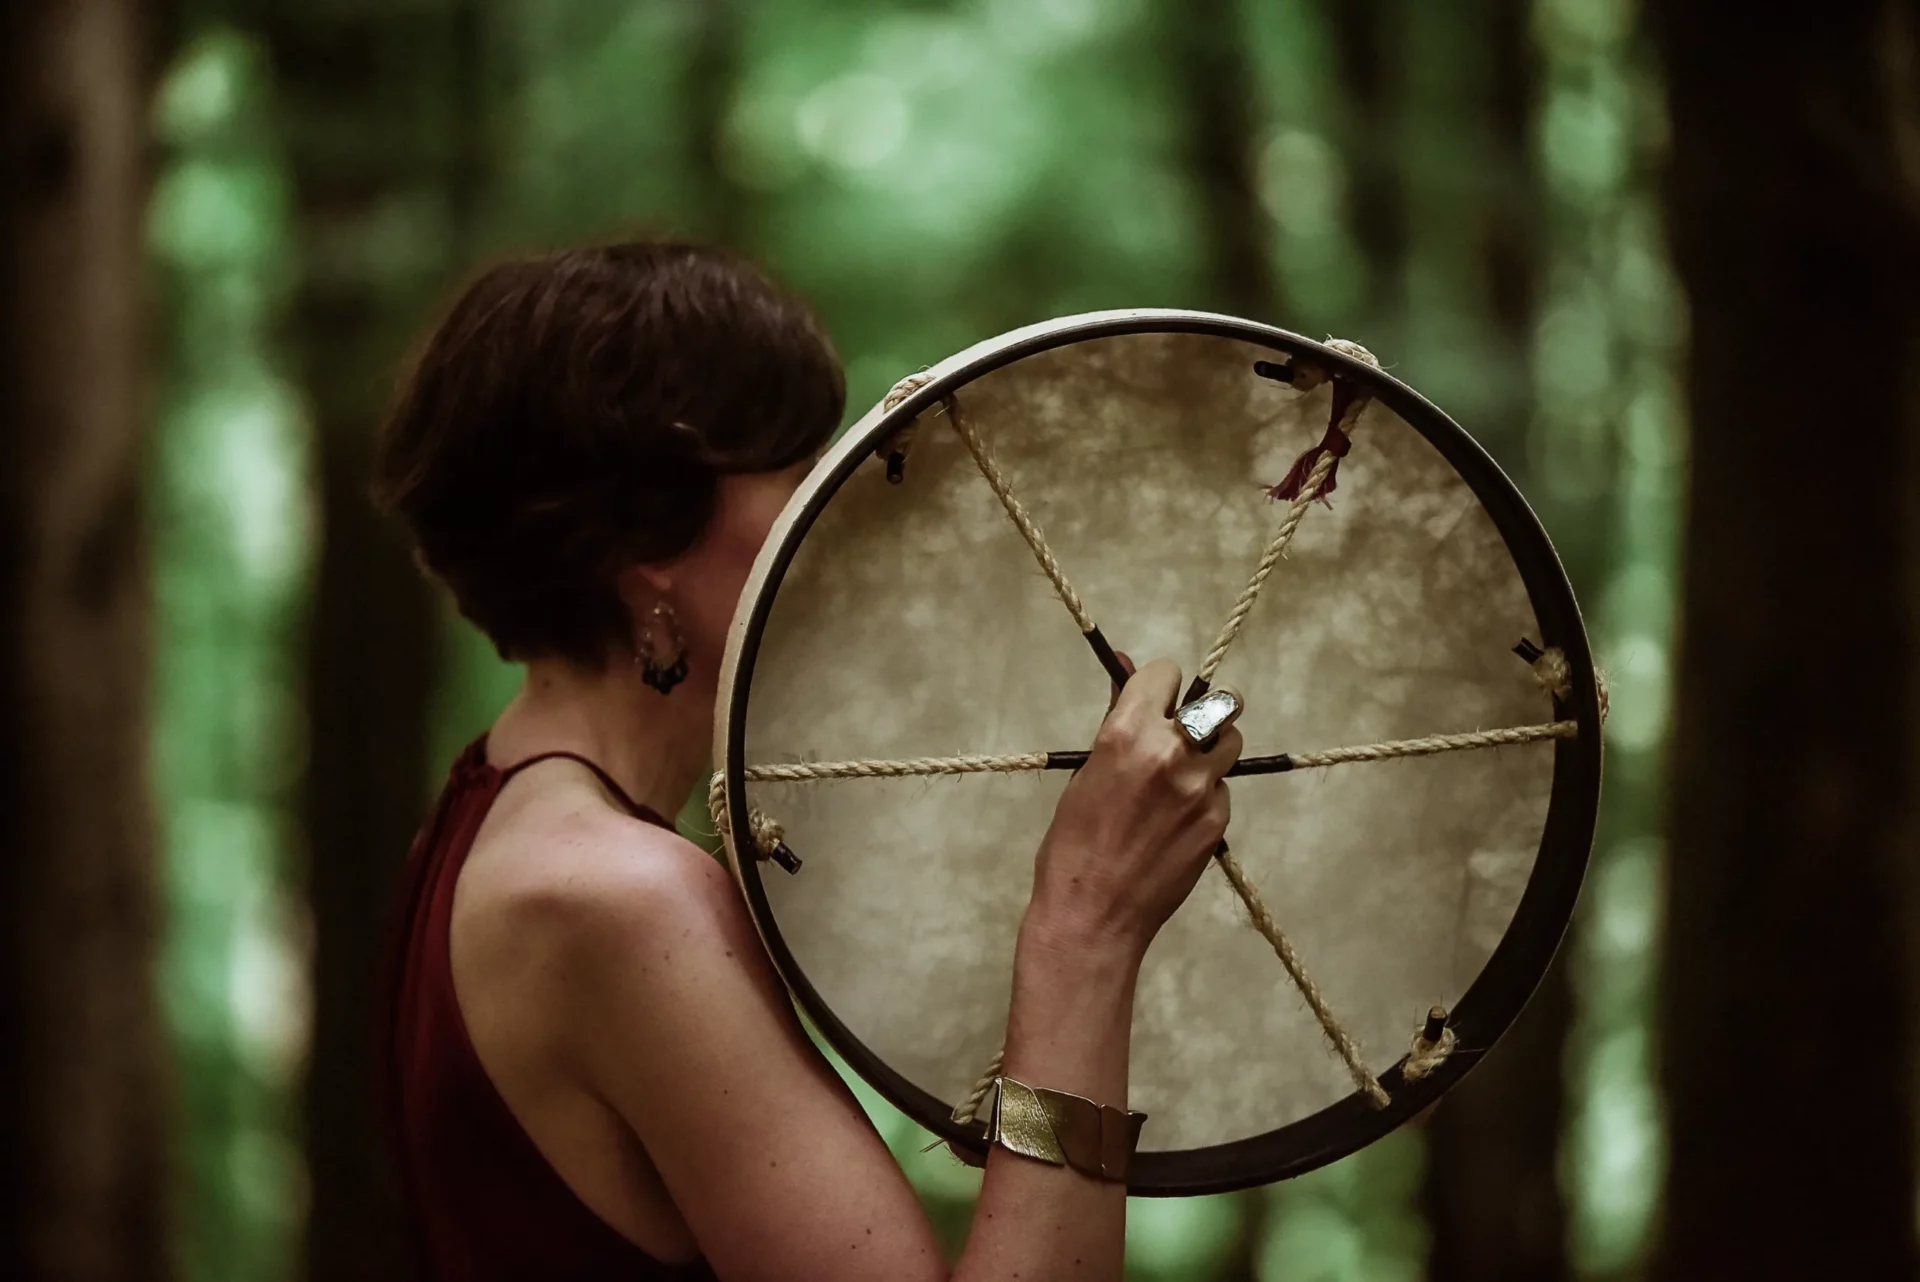 A shamanic healer gracefully holds a large drum amidst the serene woods of Ireland.